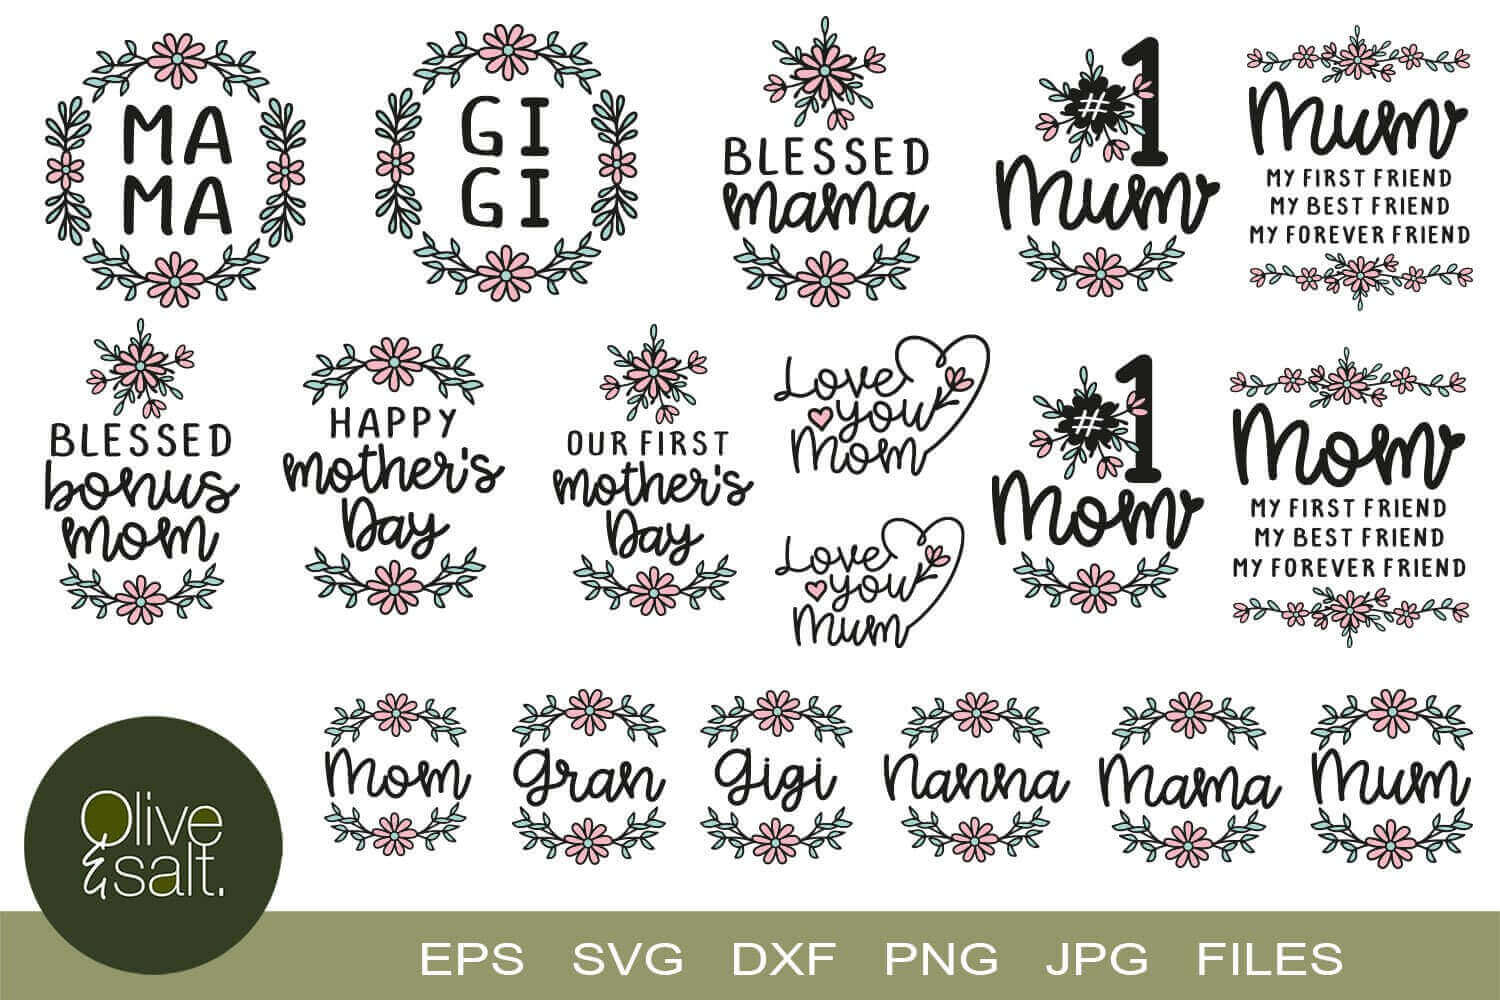 Love You Mom in EPS, SVG, DXF, PNG, JPG Files.